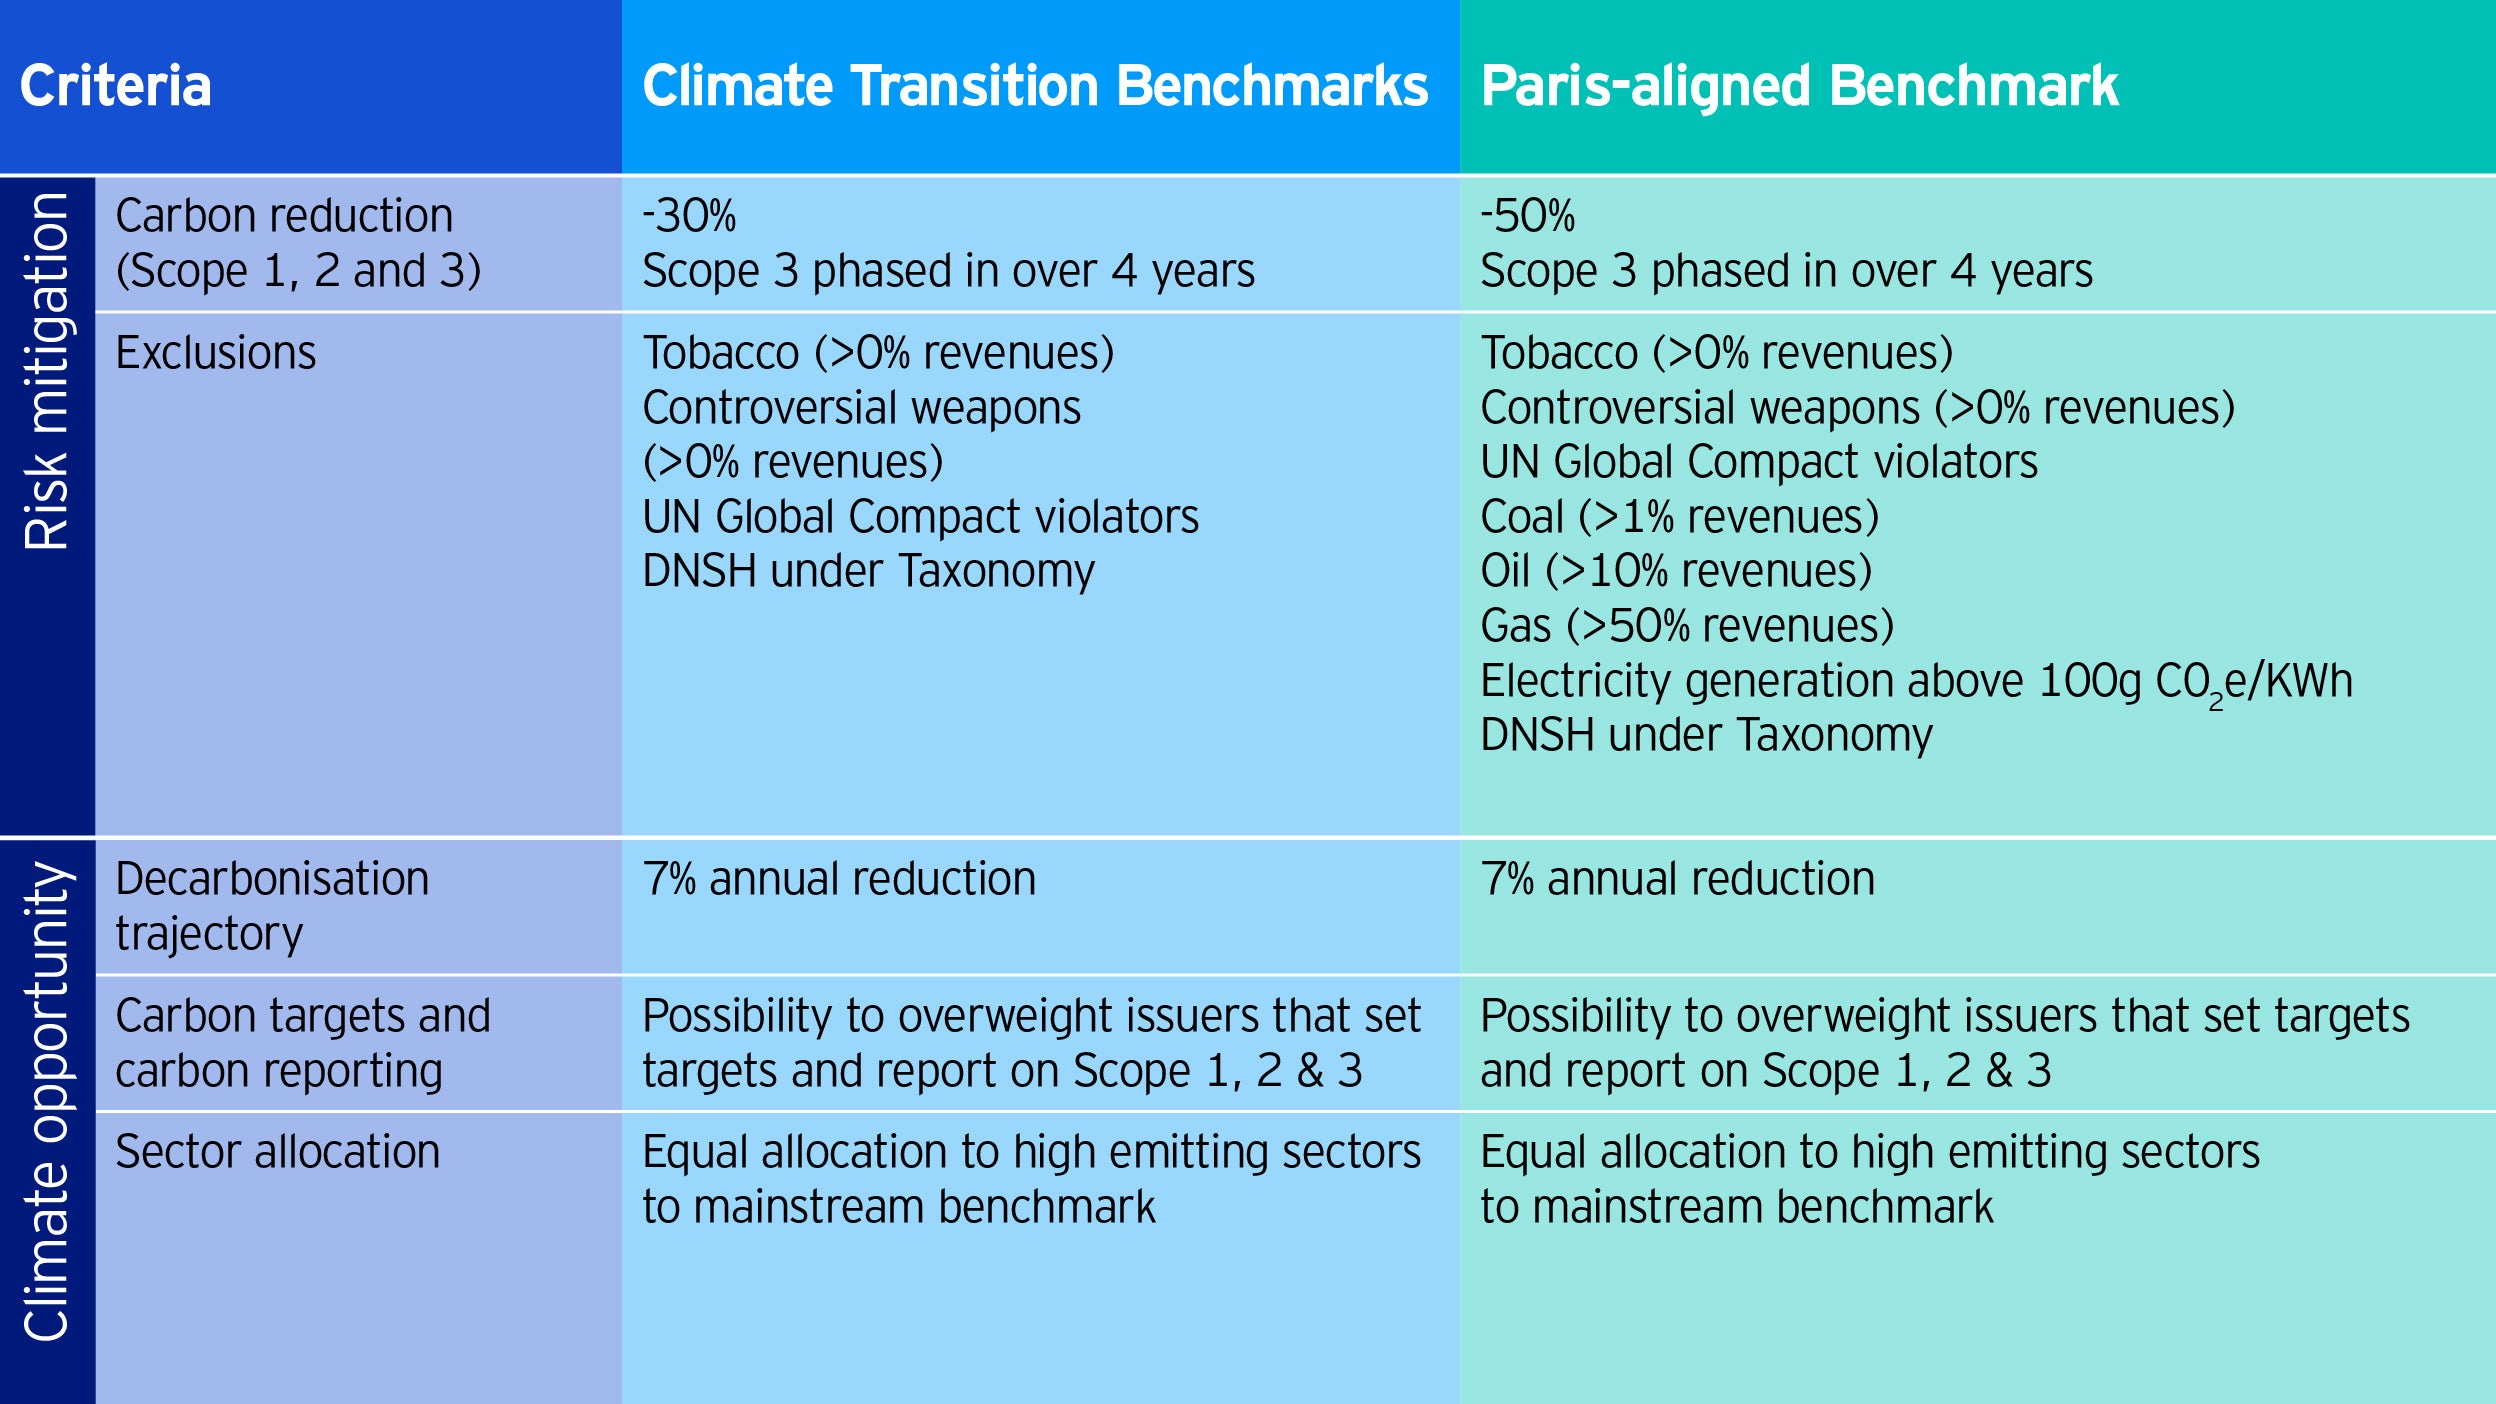 Climate transition benchmarks